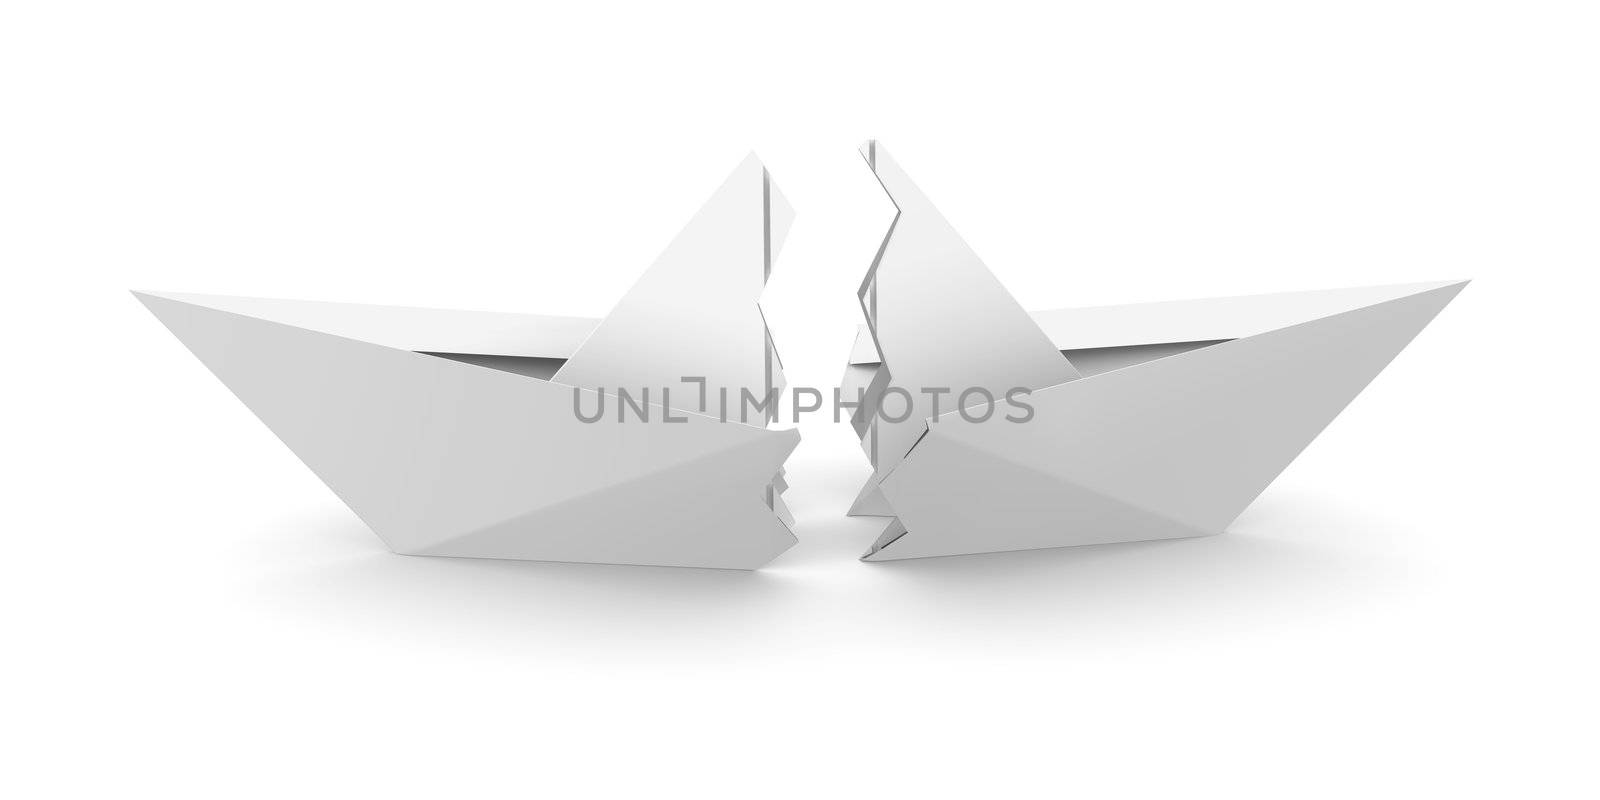 Paper Boat is broken into two parts by cherezoff